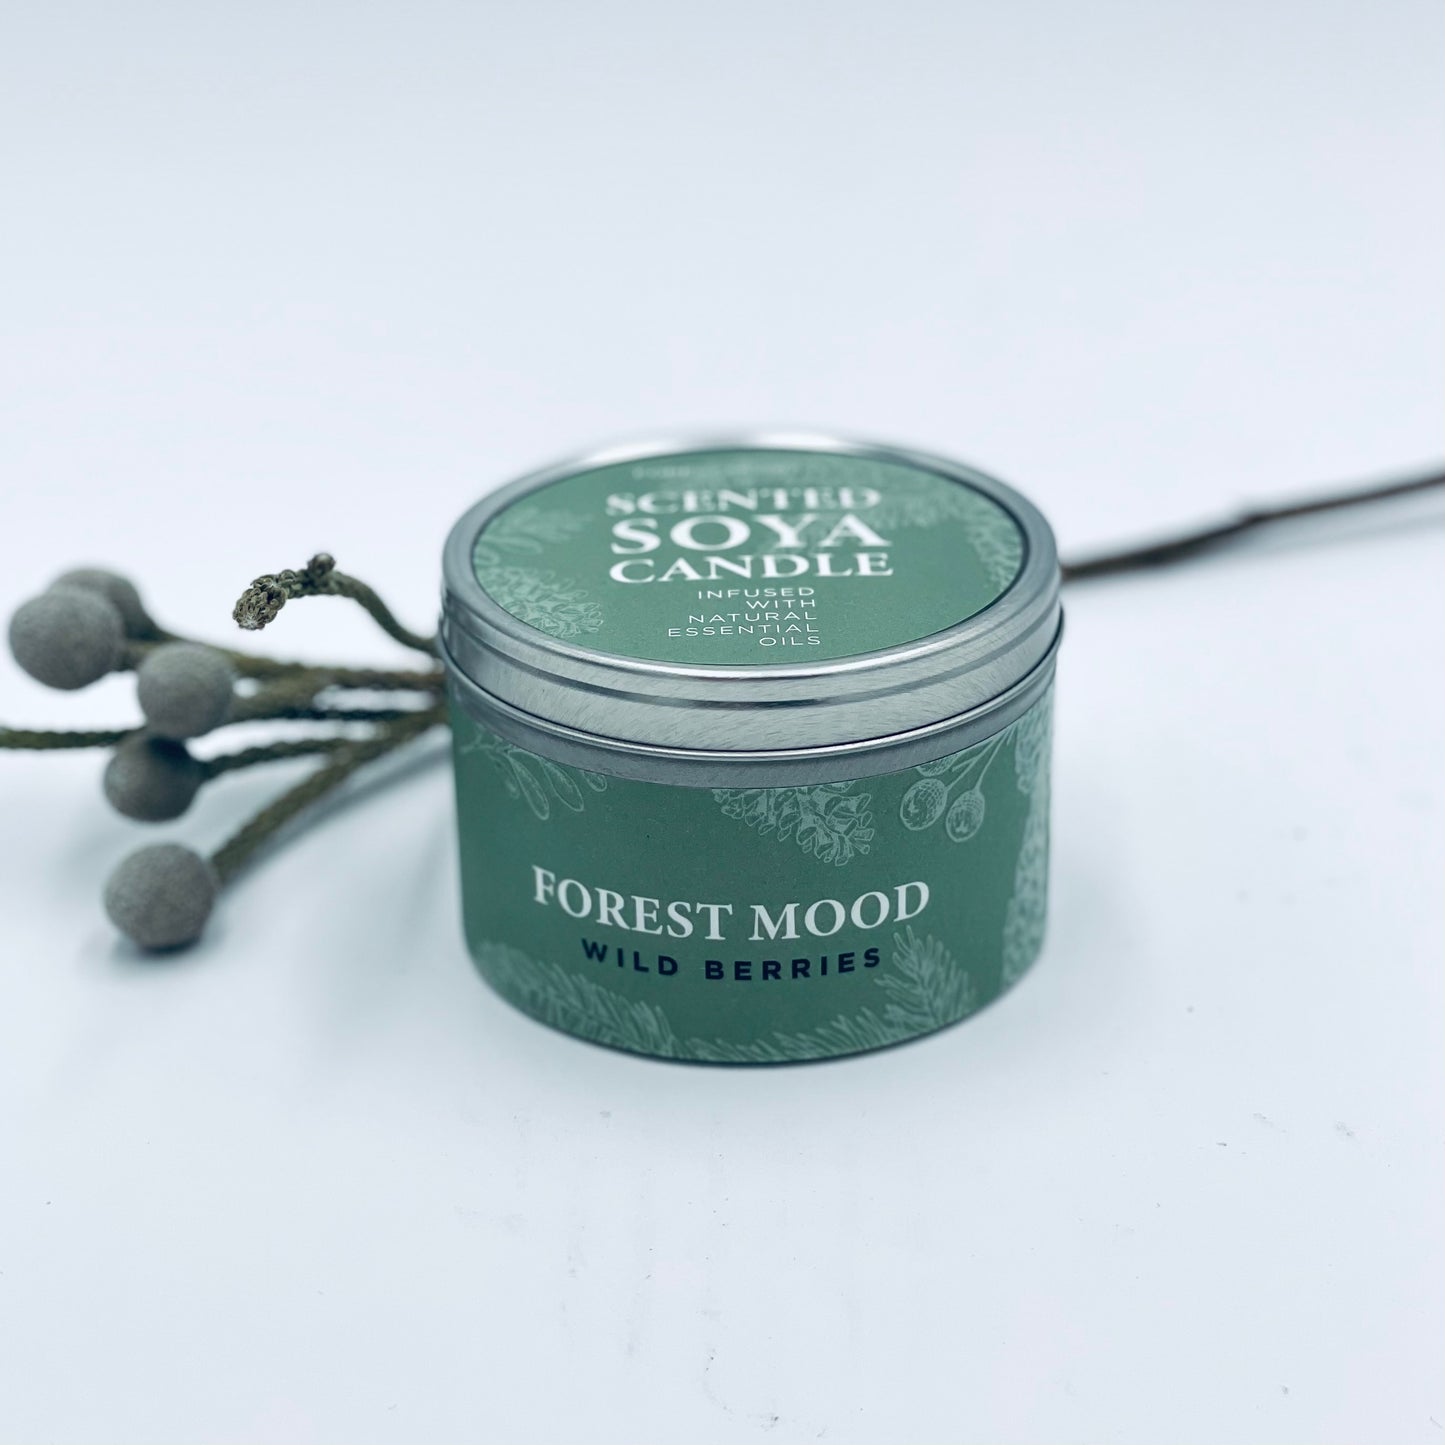 Natural soy wax candle "FOREST MOOD" with FOREST BERRY scent